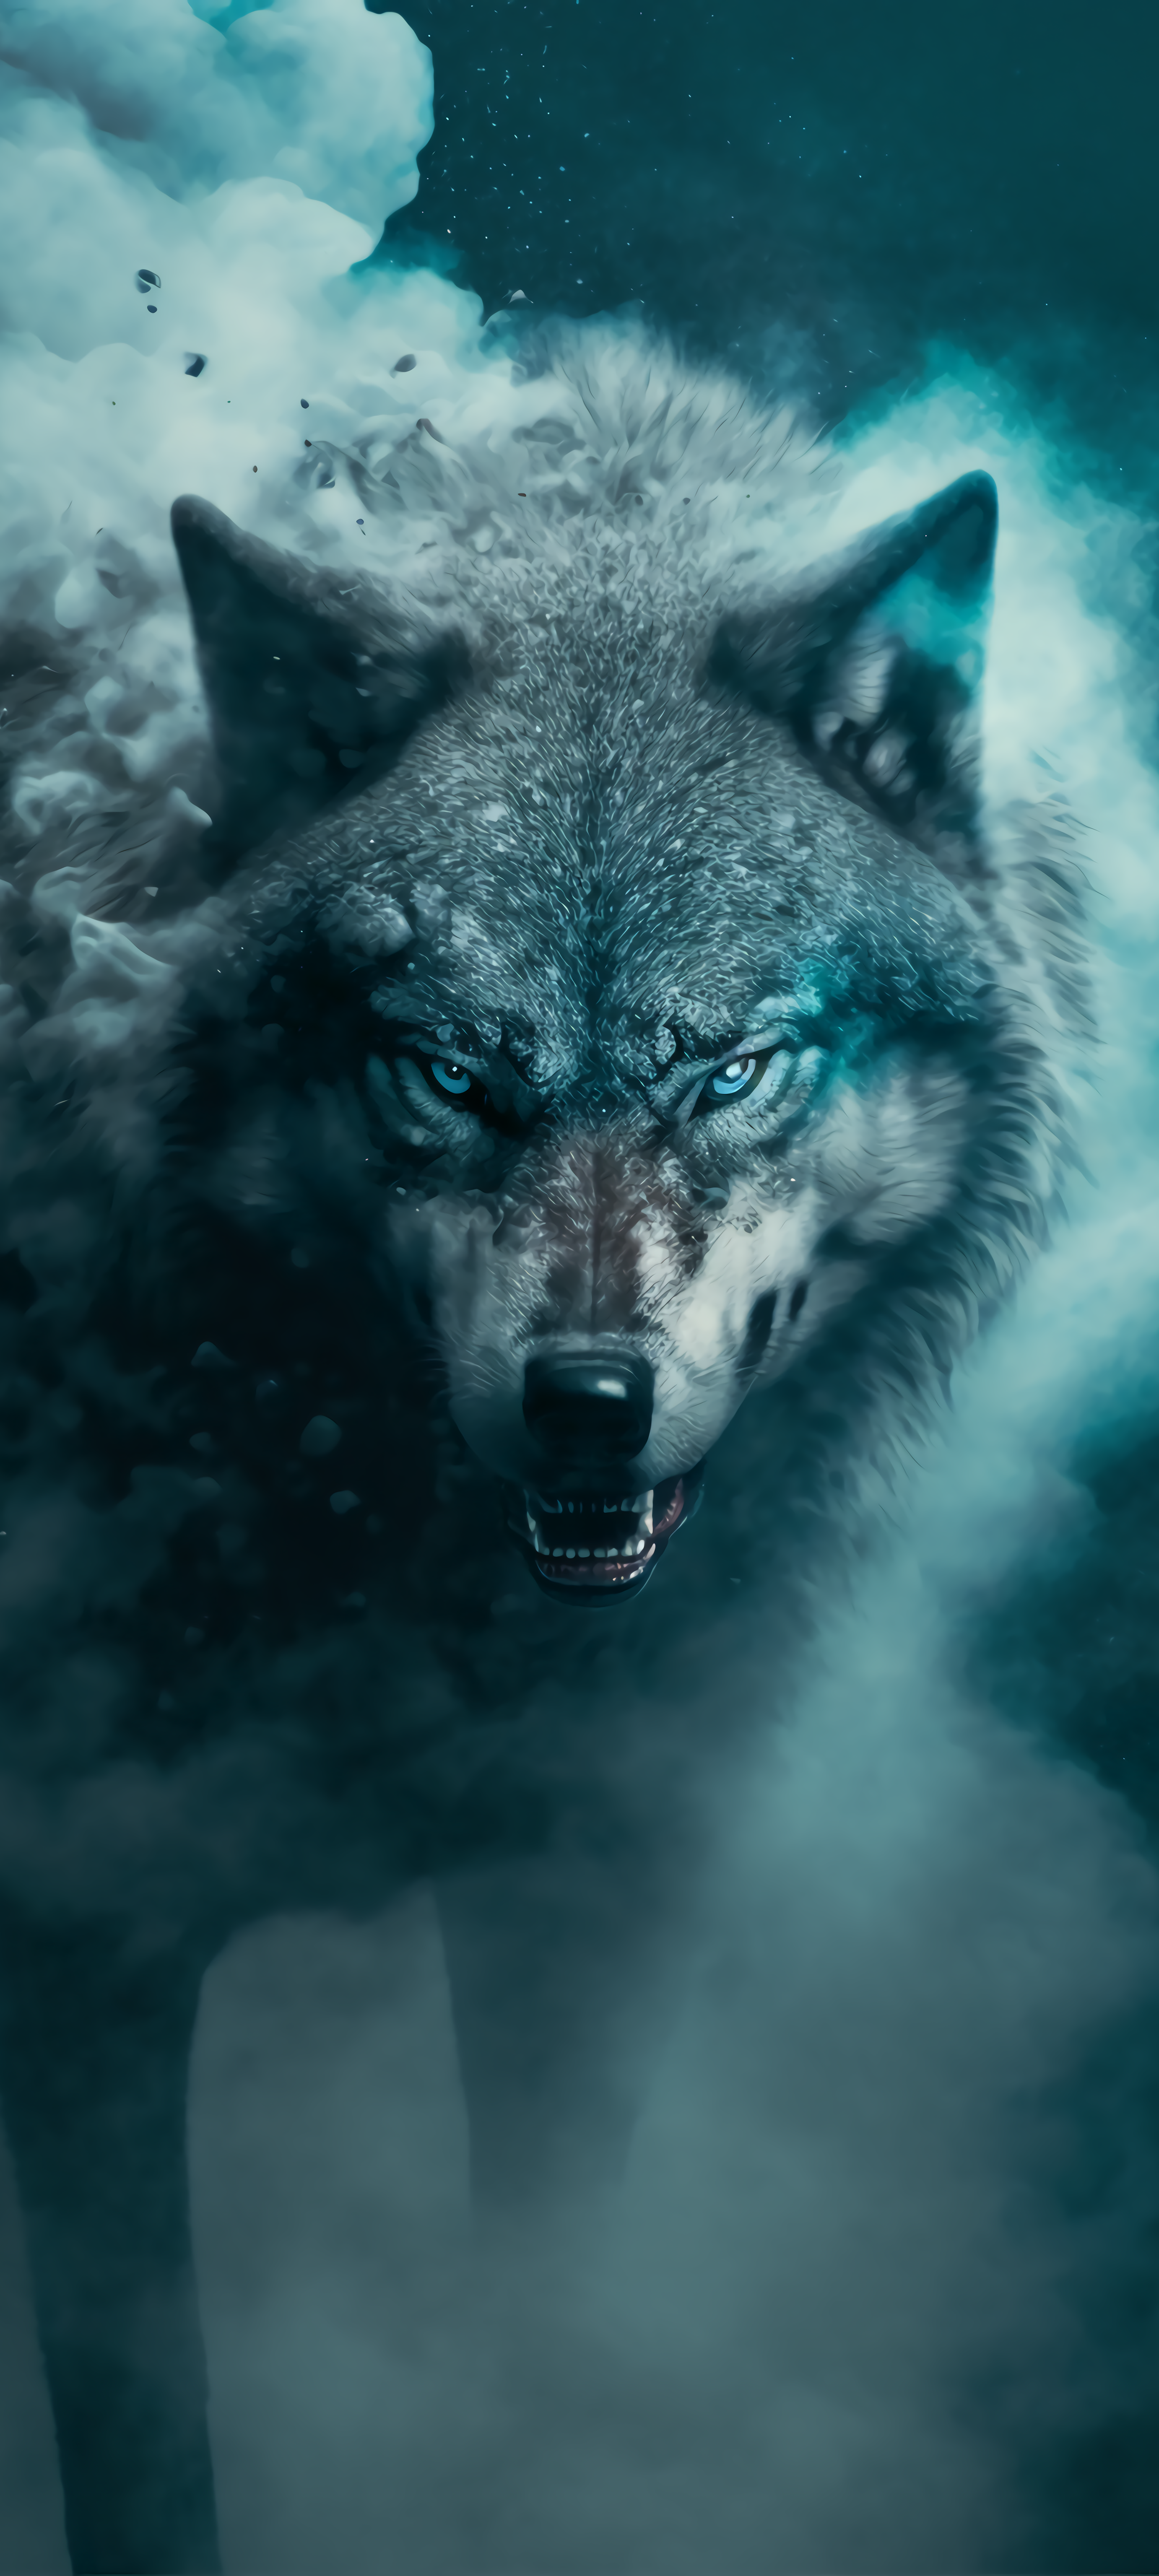 The Alpha Wolf IPhone Wallpaper HD  IPhone Wallpapers  iPhone Wallpapers